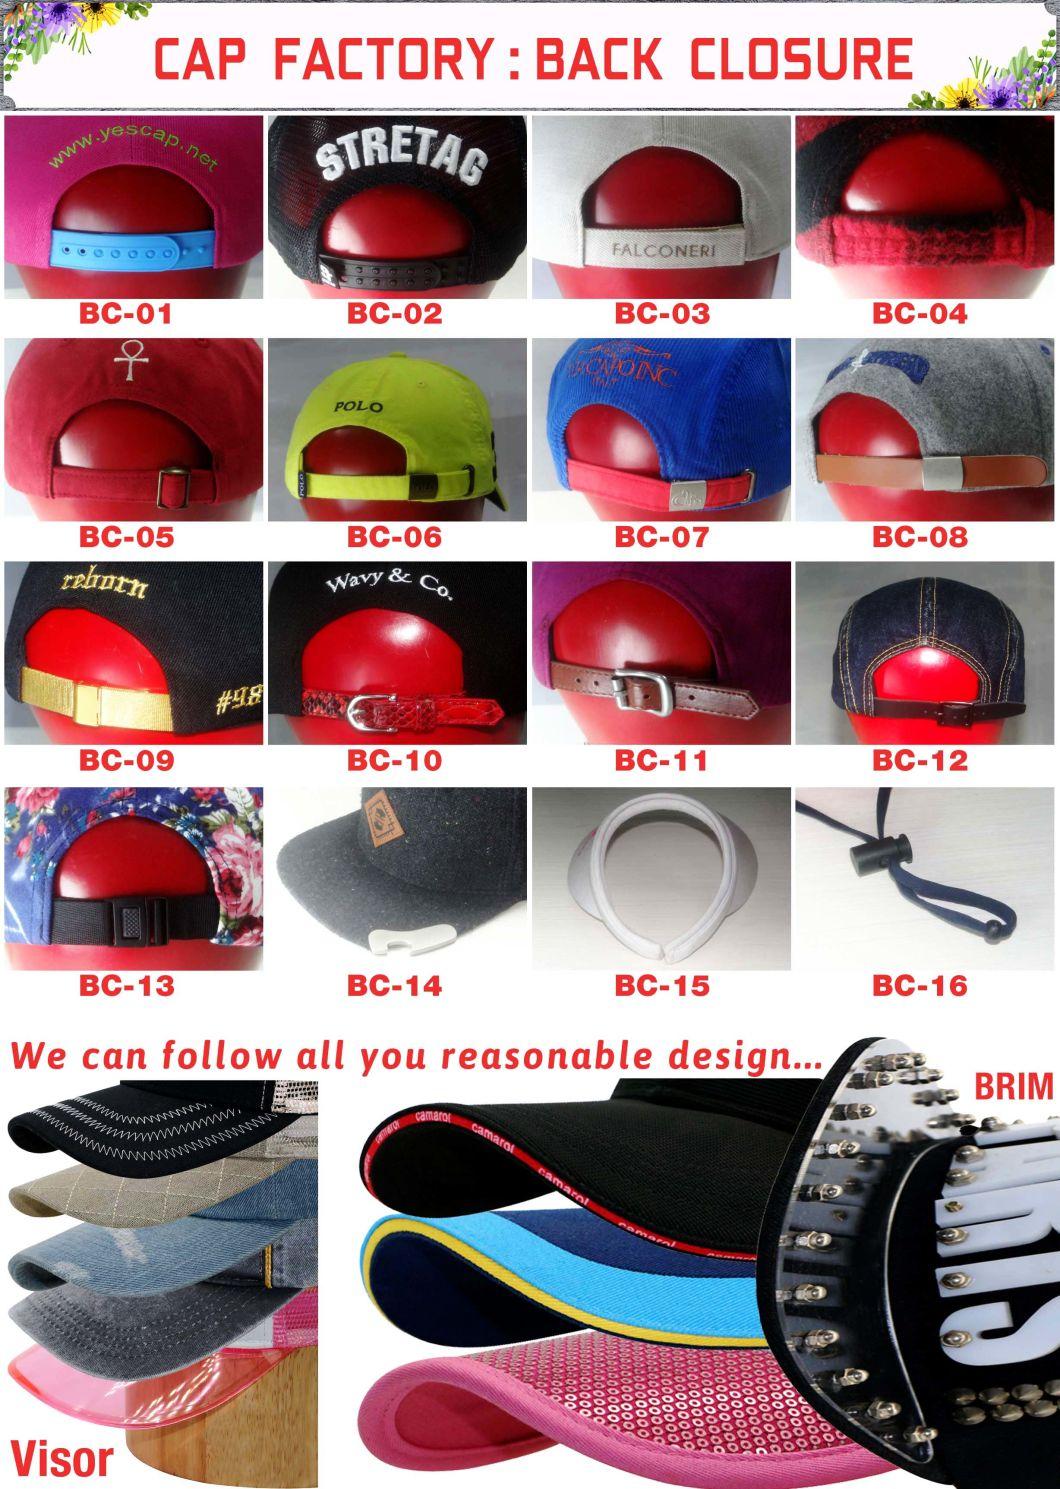 Custom Sublimation Mesh Trucker Hats and Caps for Kids